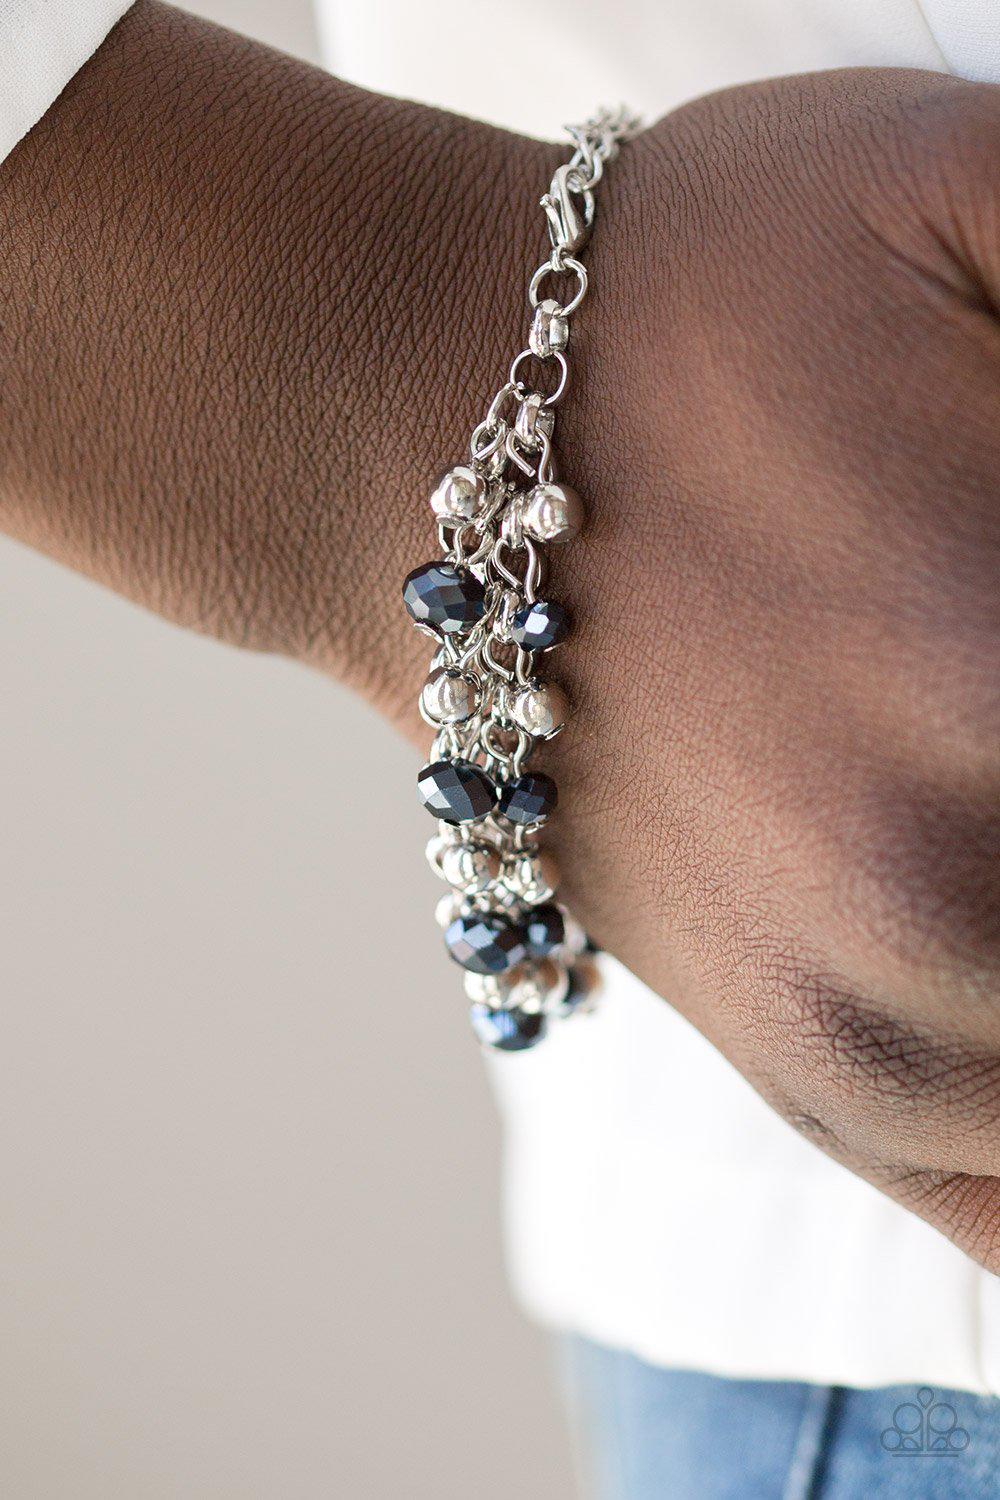 Just For The Fund Of It Metallic Blue and Silver Bracelet - Paparazzi Accessories-CarasShop.com - $5 Jewelry by Cara Jewels